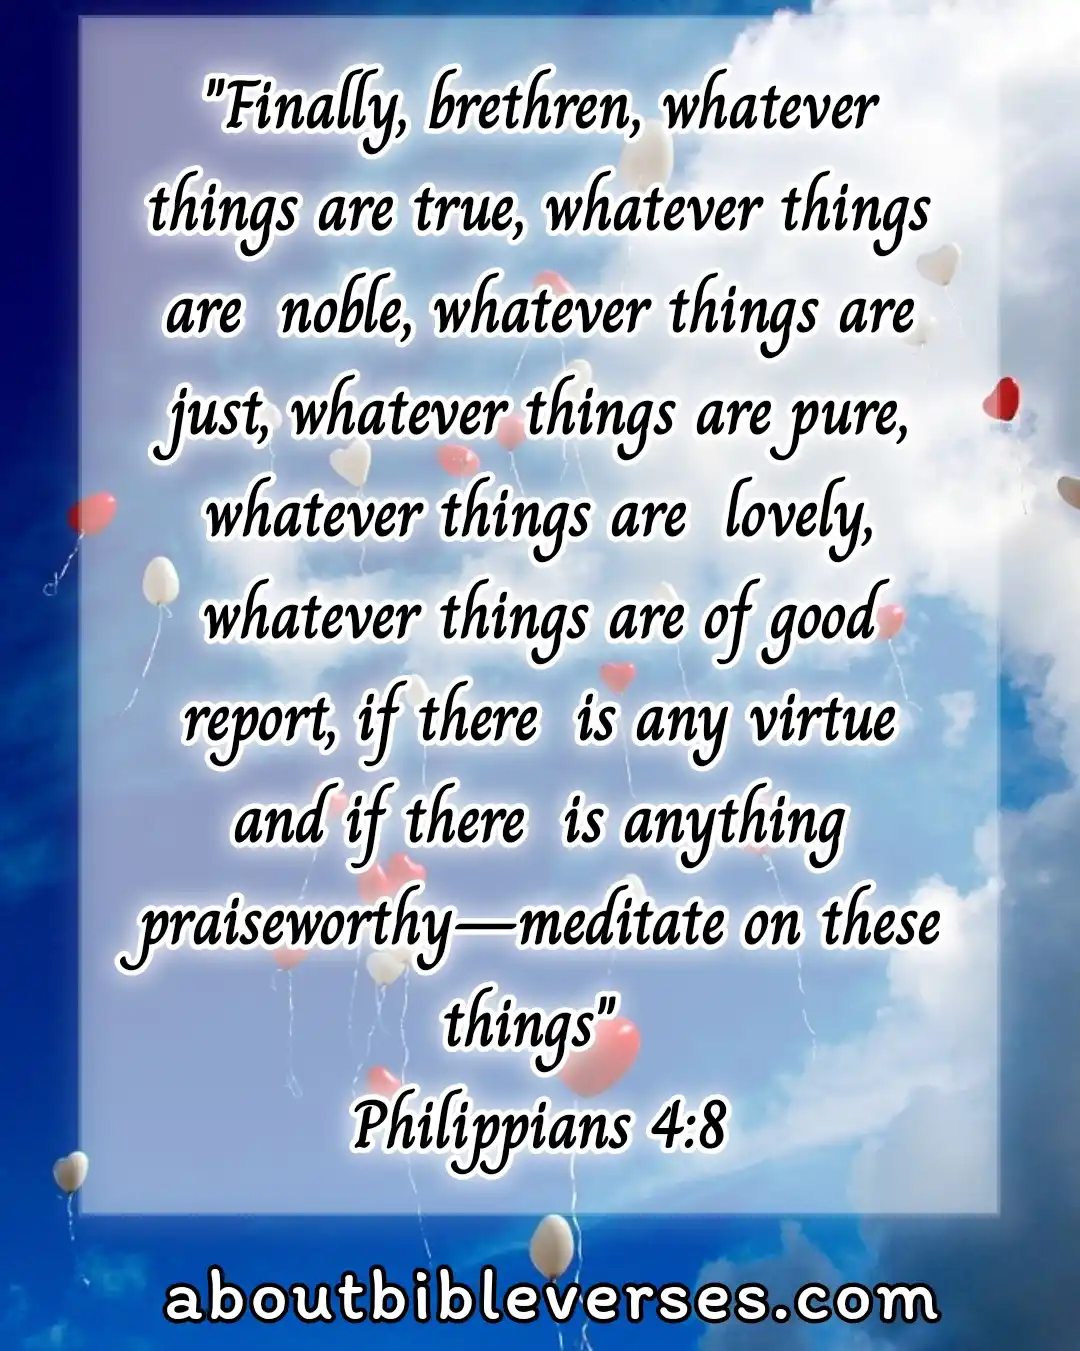 Bible Verses About Attitude Towards Others (Philippians 4:8)